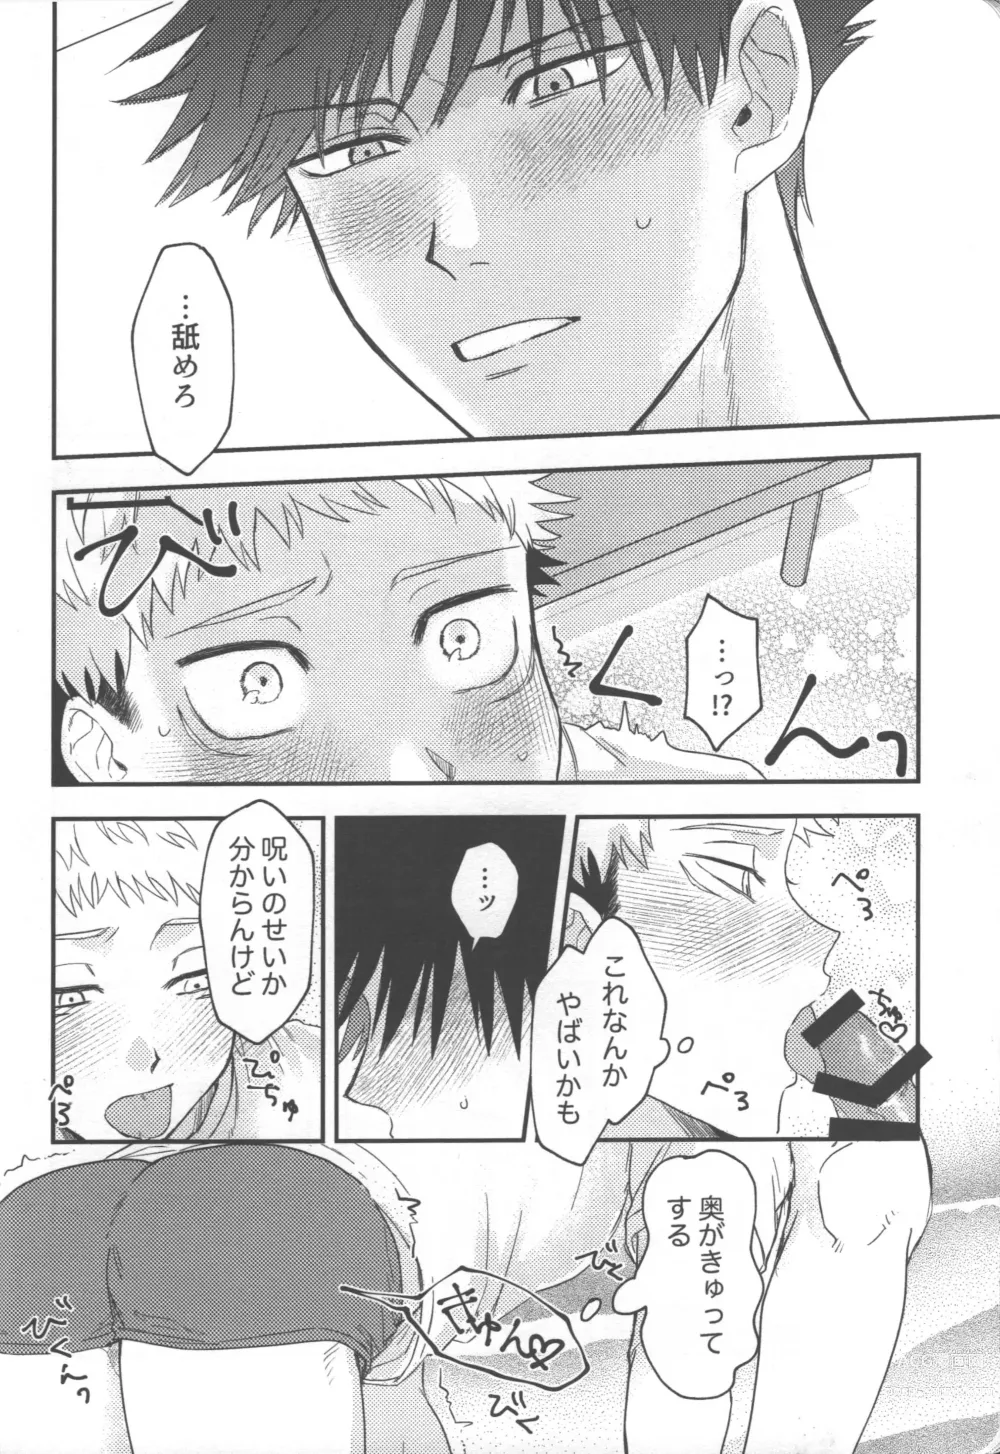 Page 17 of doujinshi Dont Look at ME Like That.